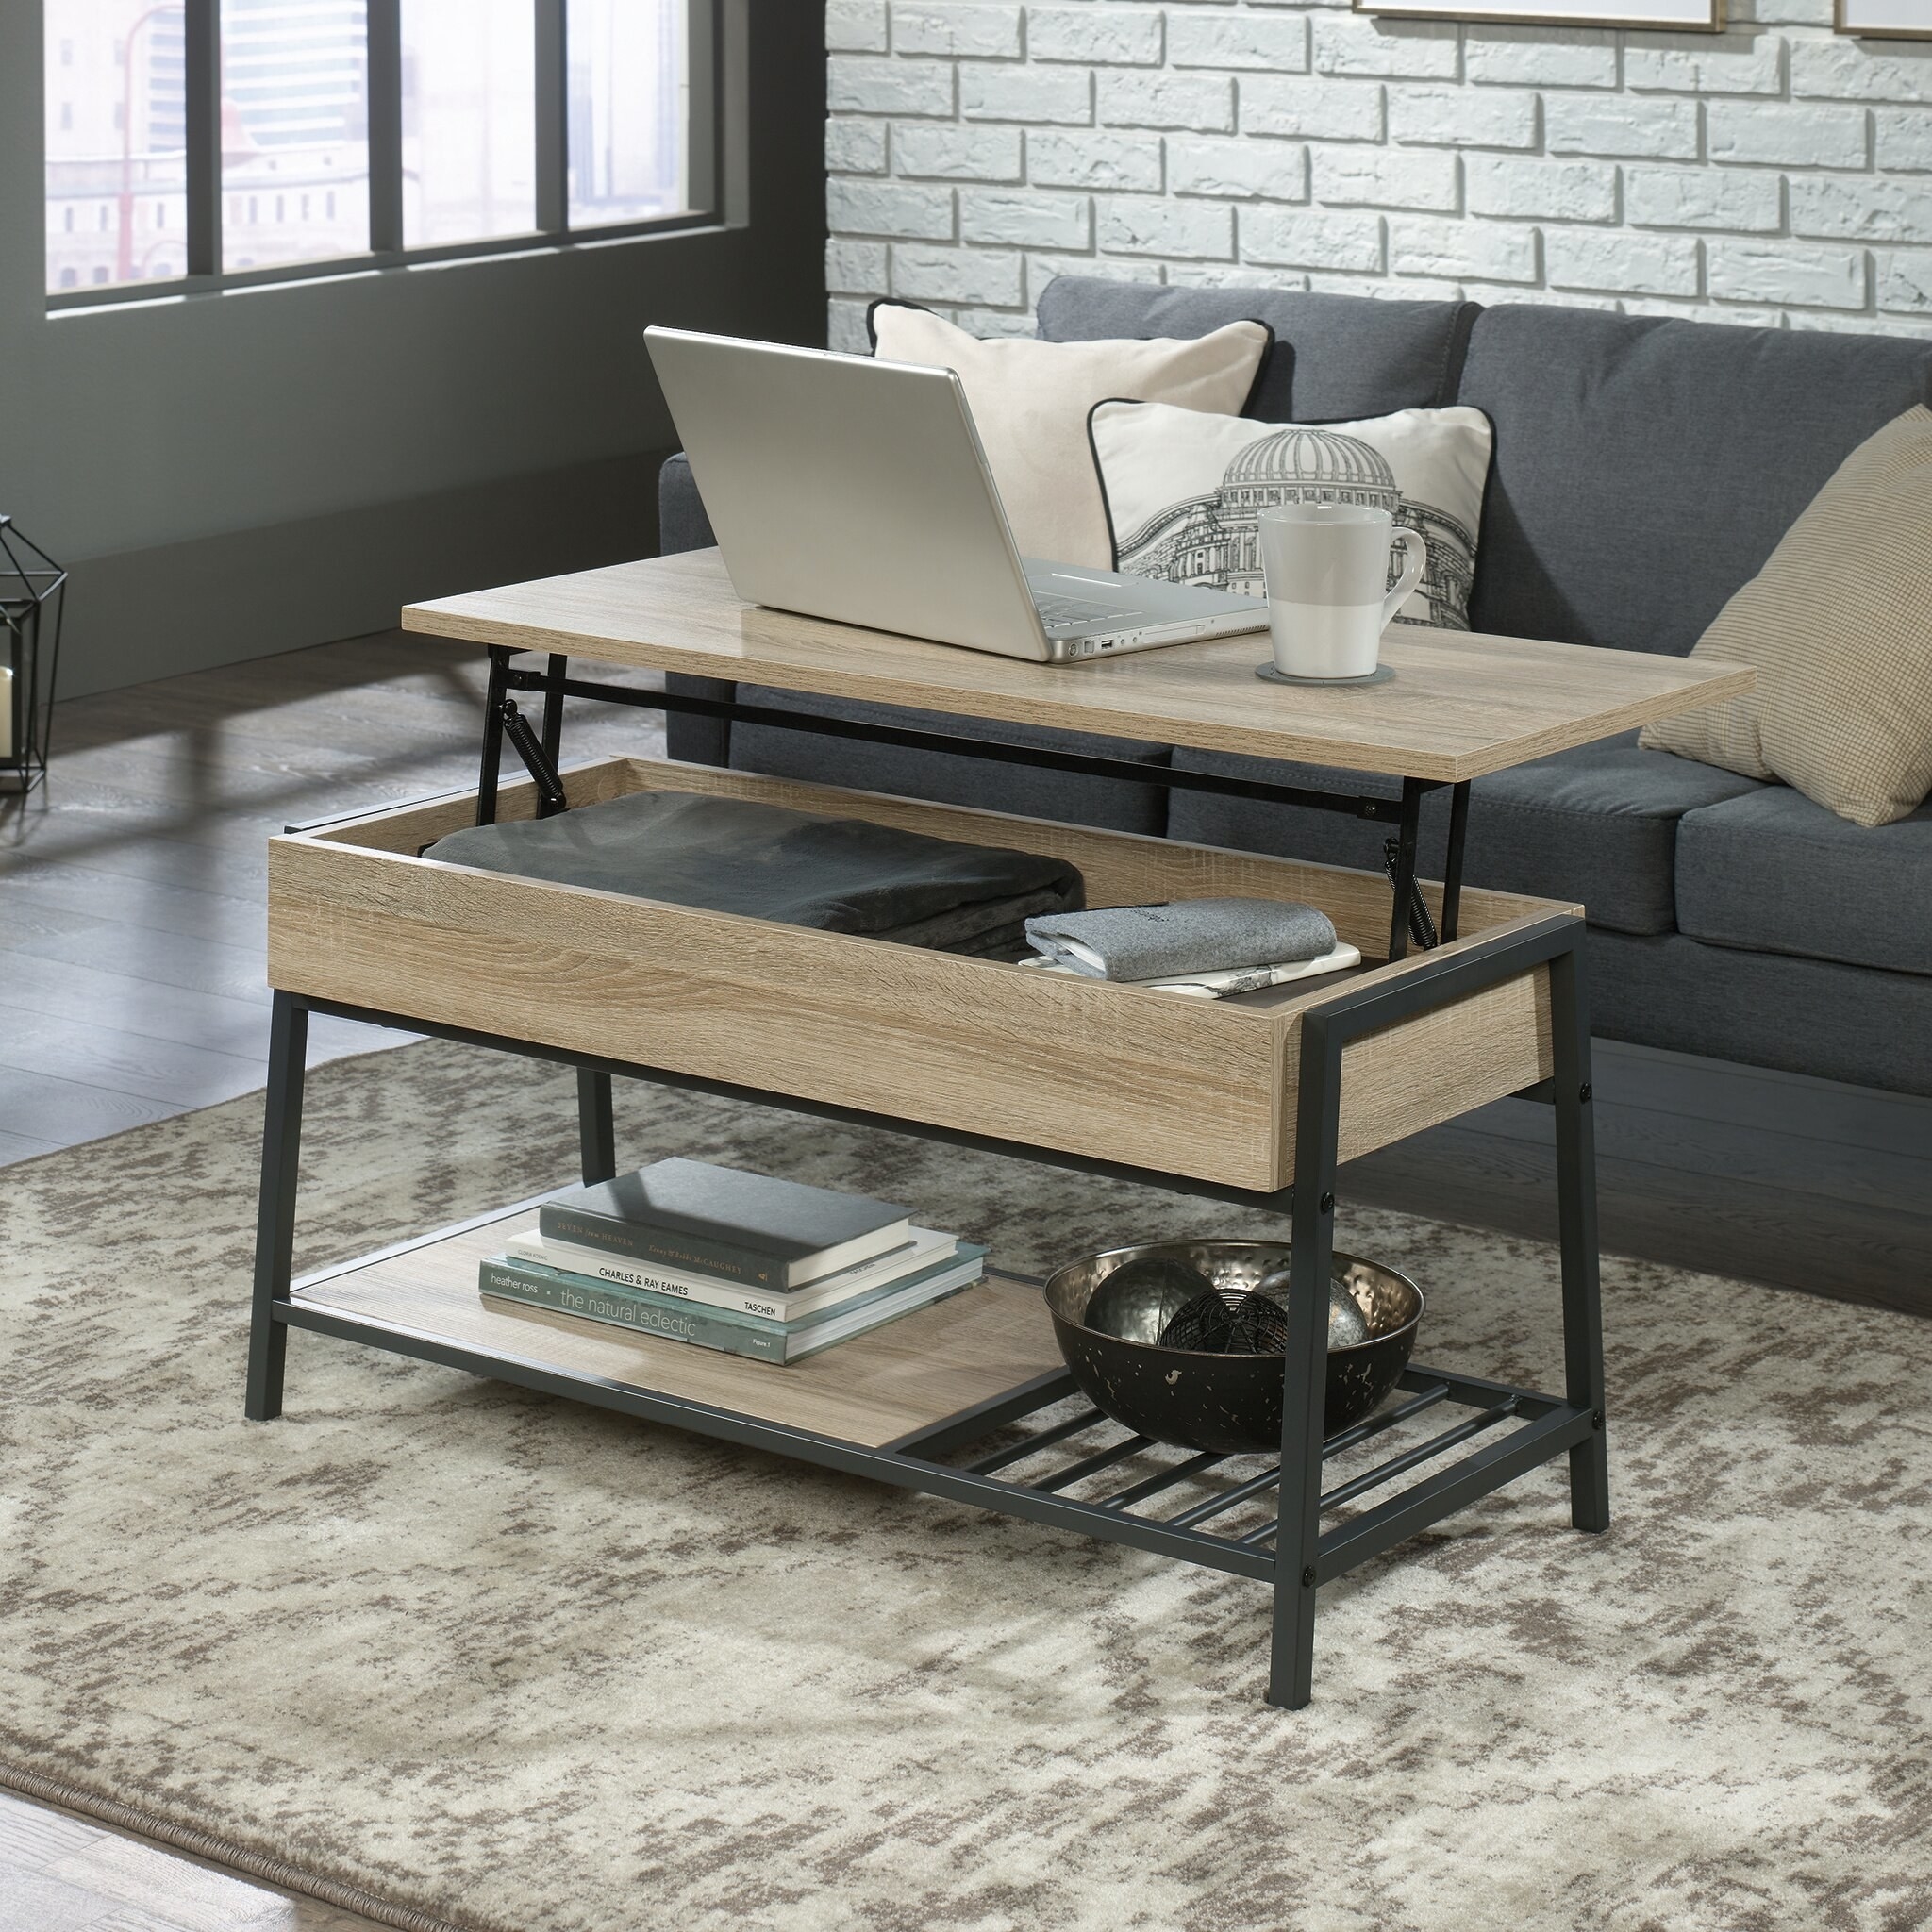 the oak wood coffee table with the top lifted and elevated to show the storage capacity